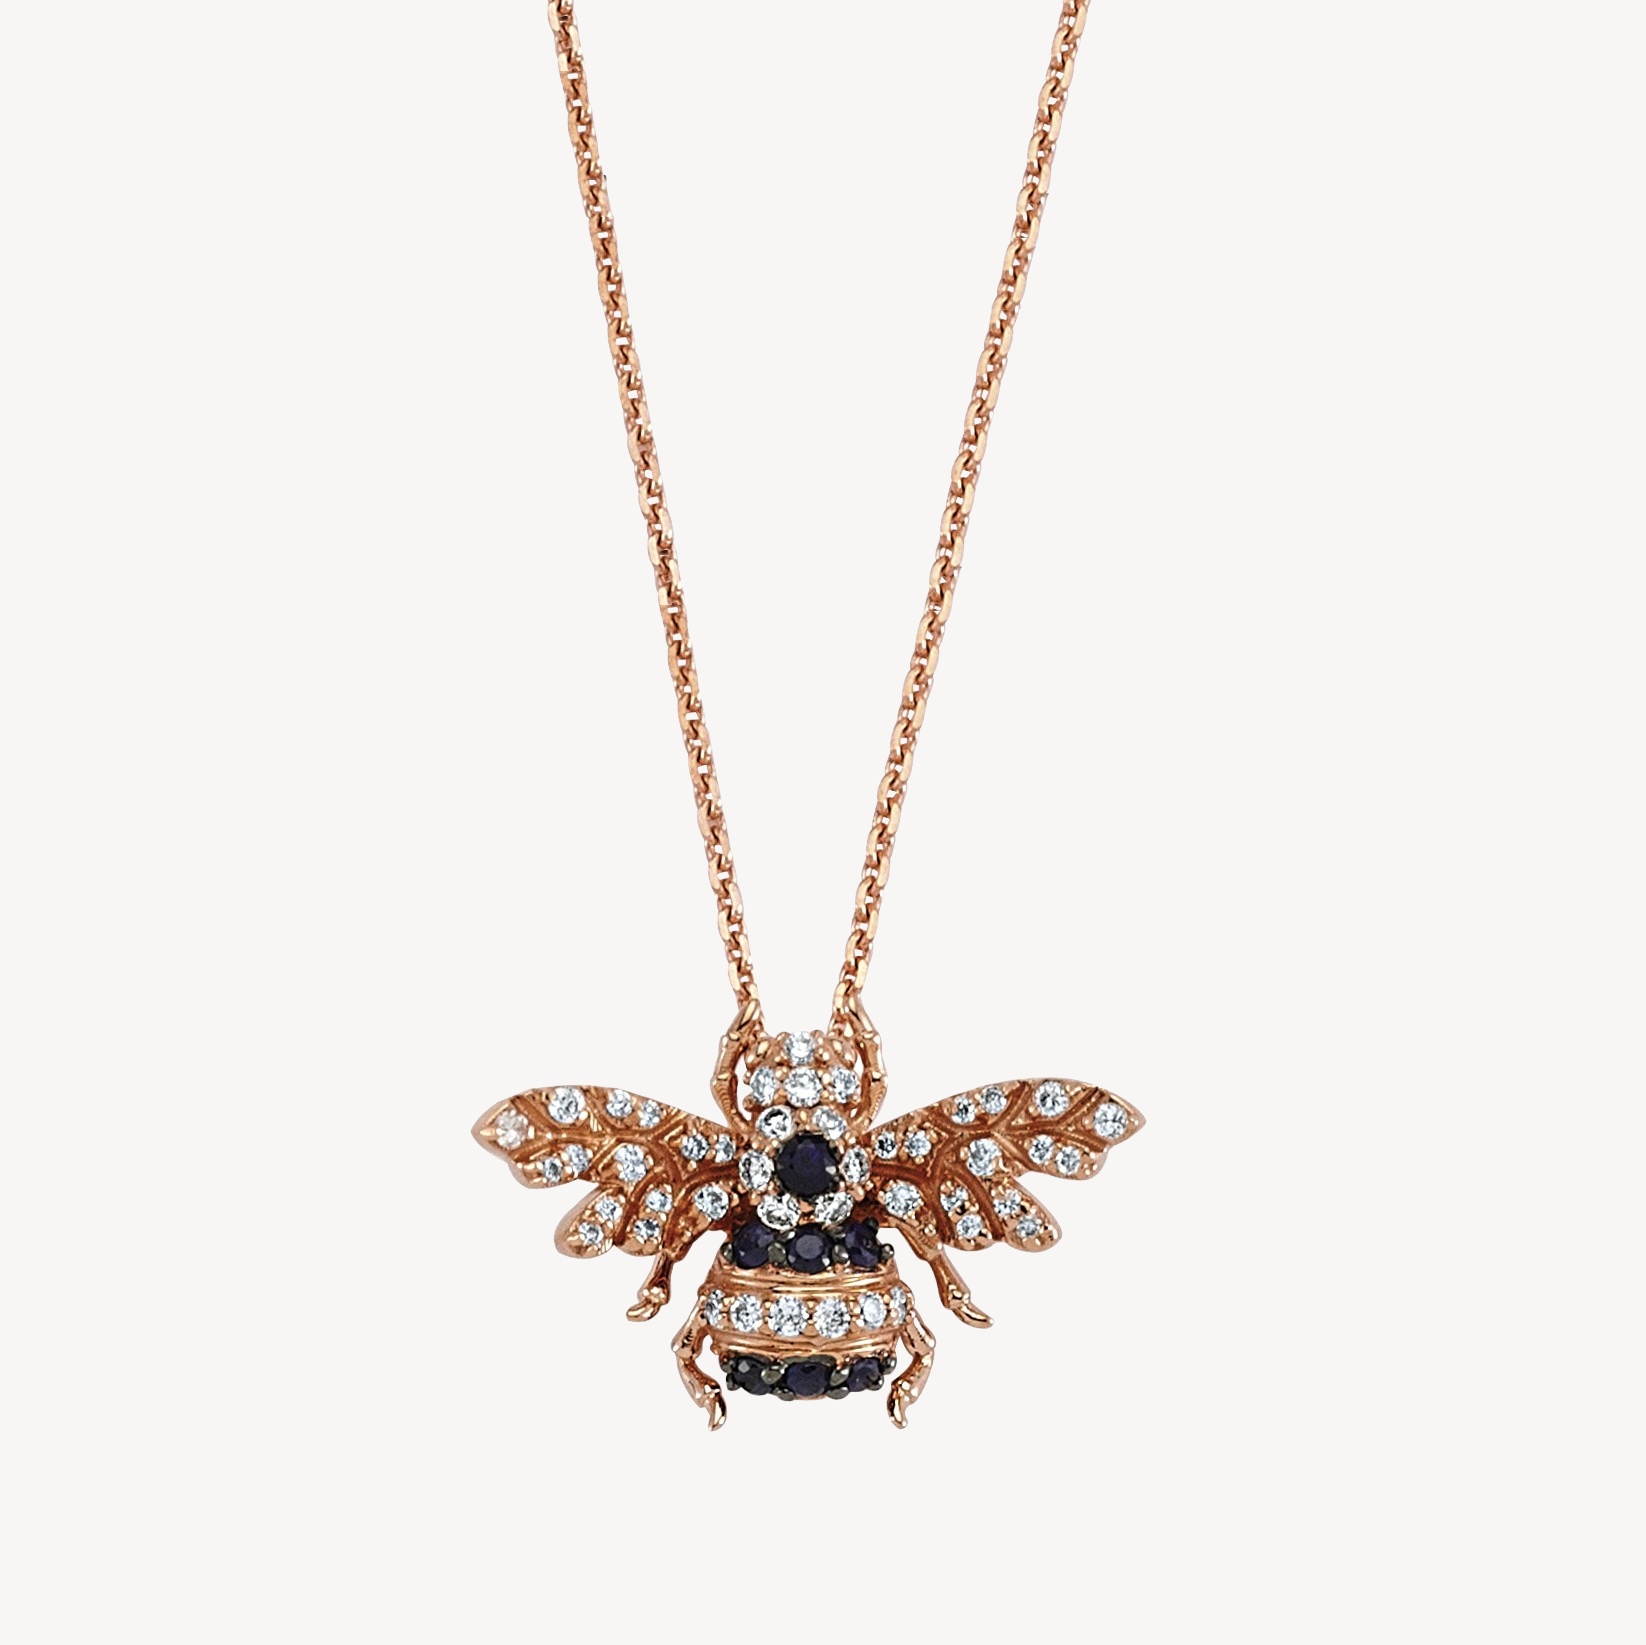 White and Black Diamond Bee Necklace